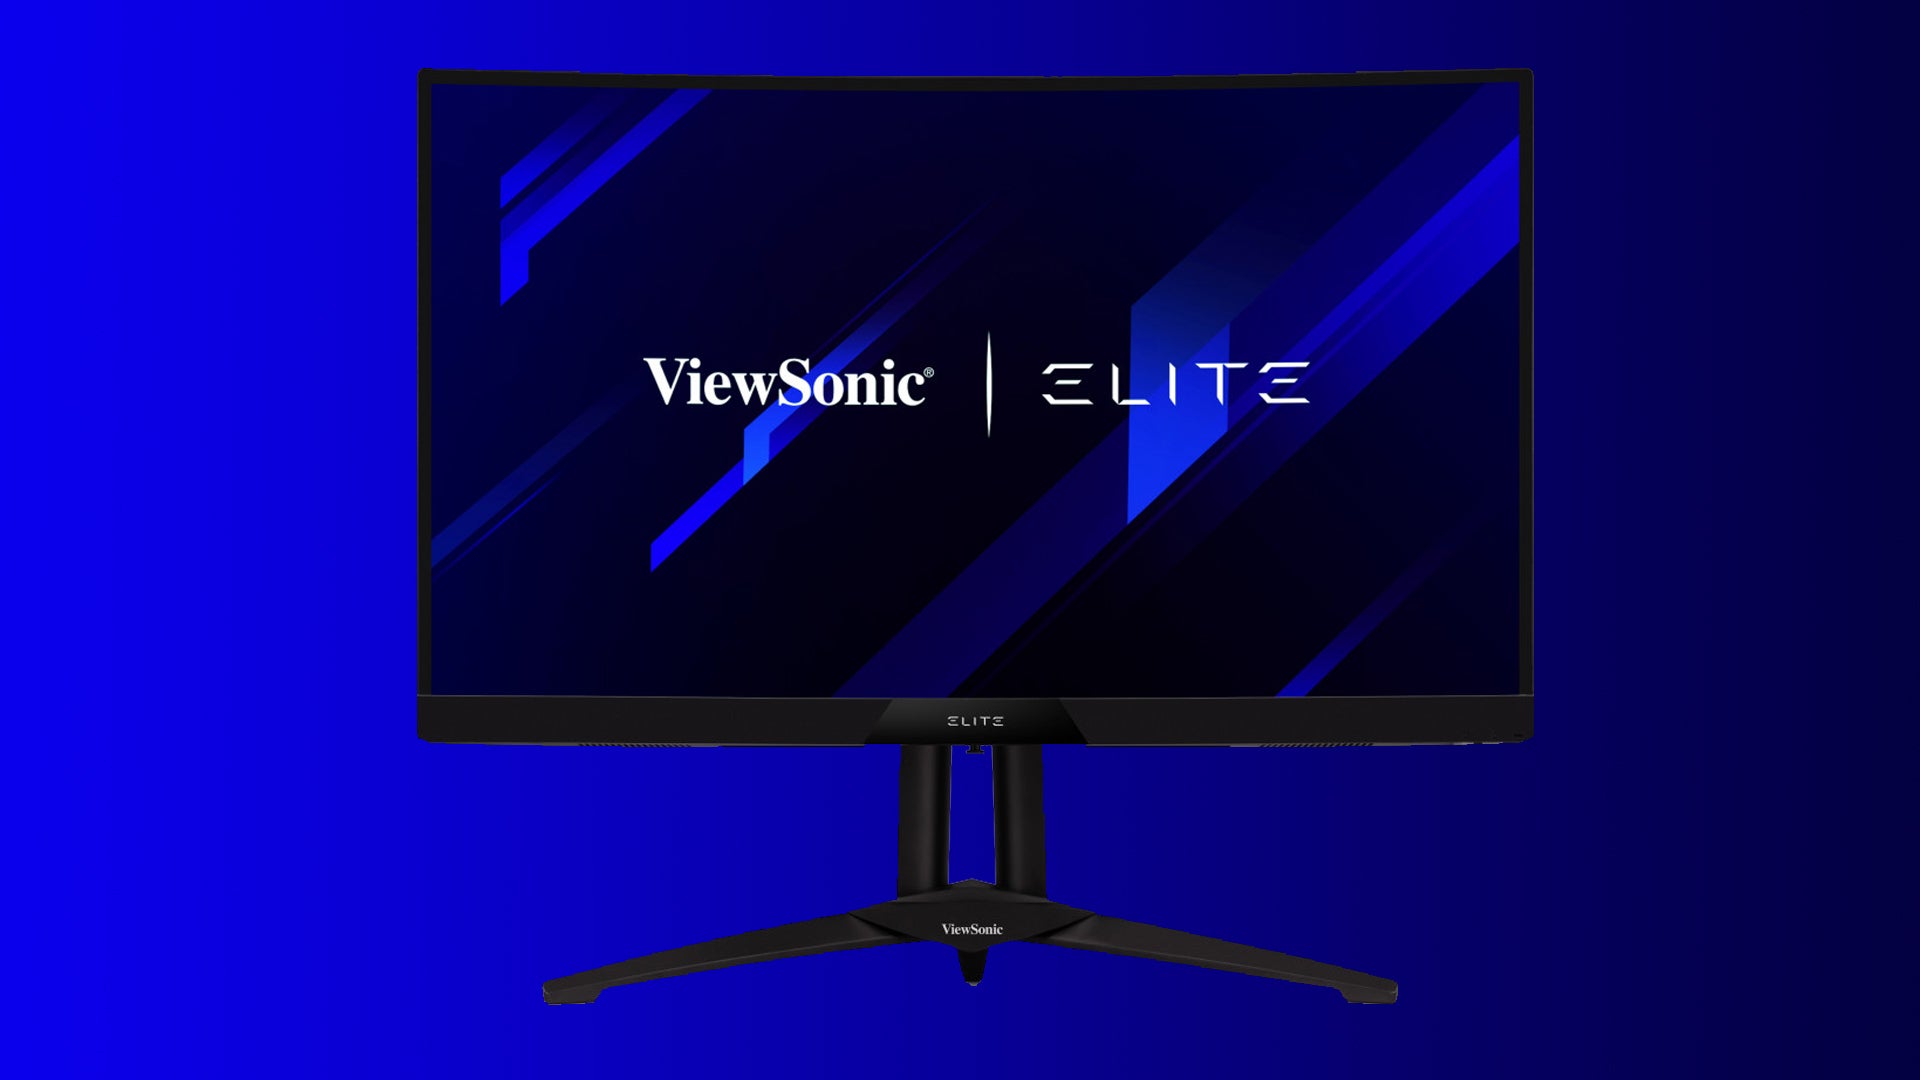 Image of ViewSonic XG270QC gaming monitor on a blue gradient background